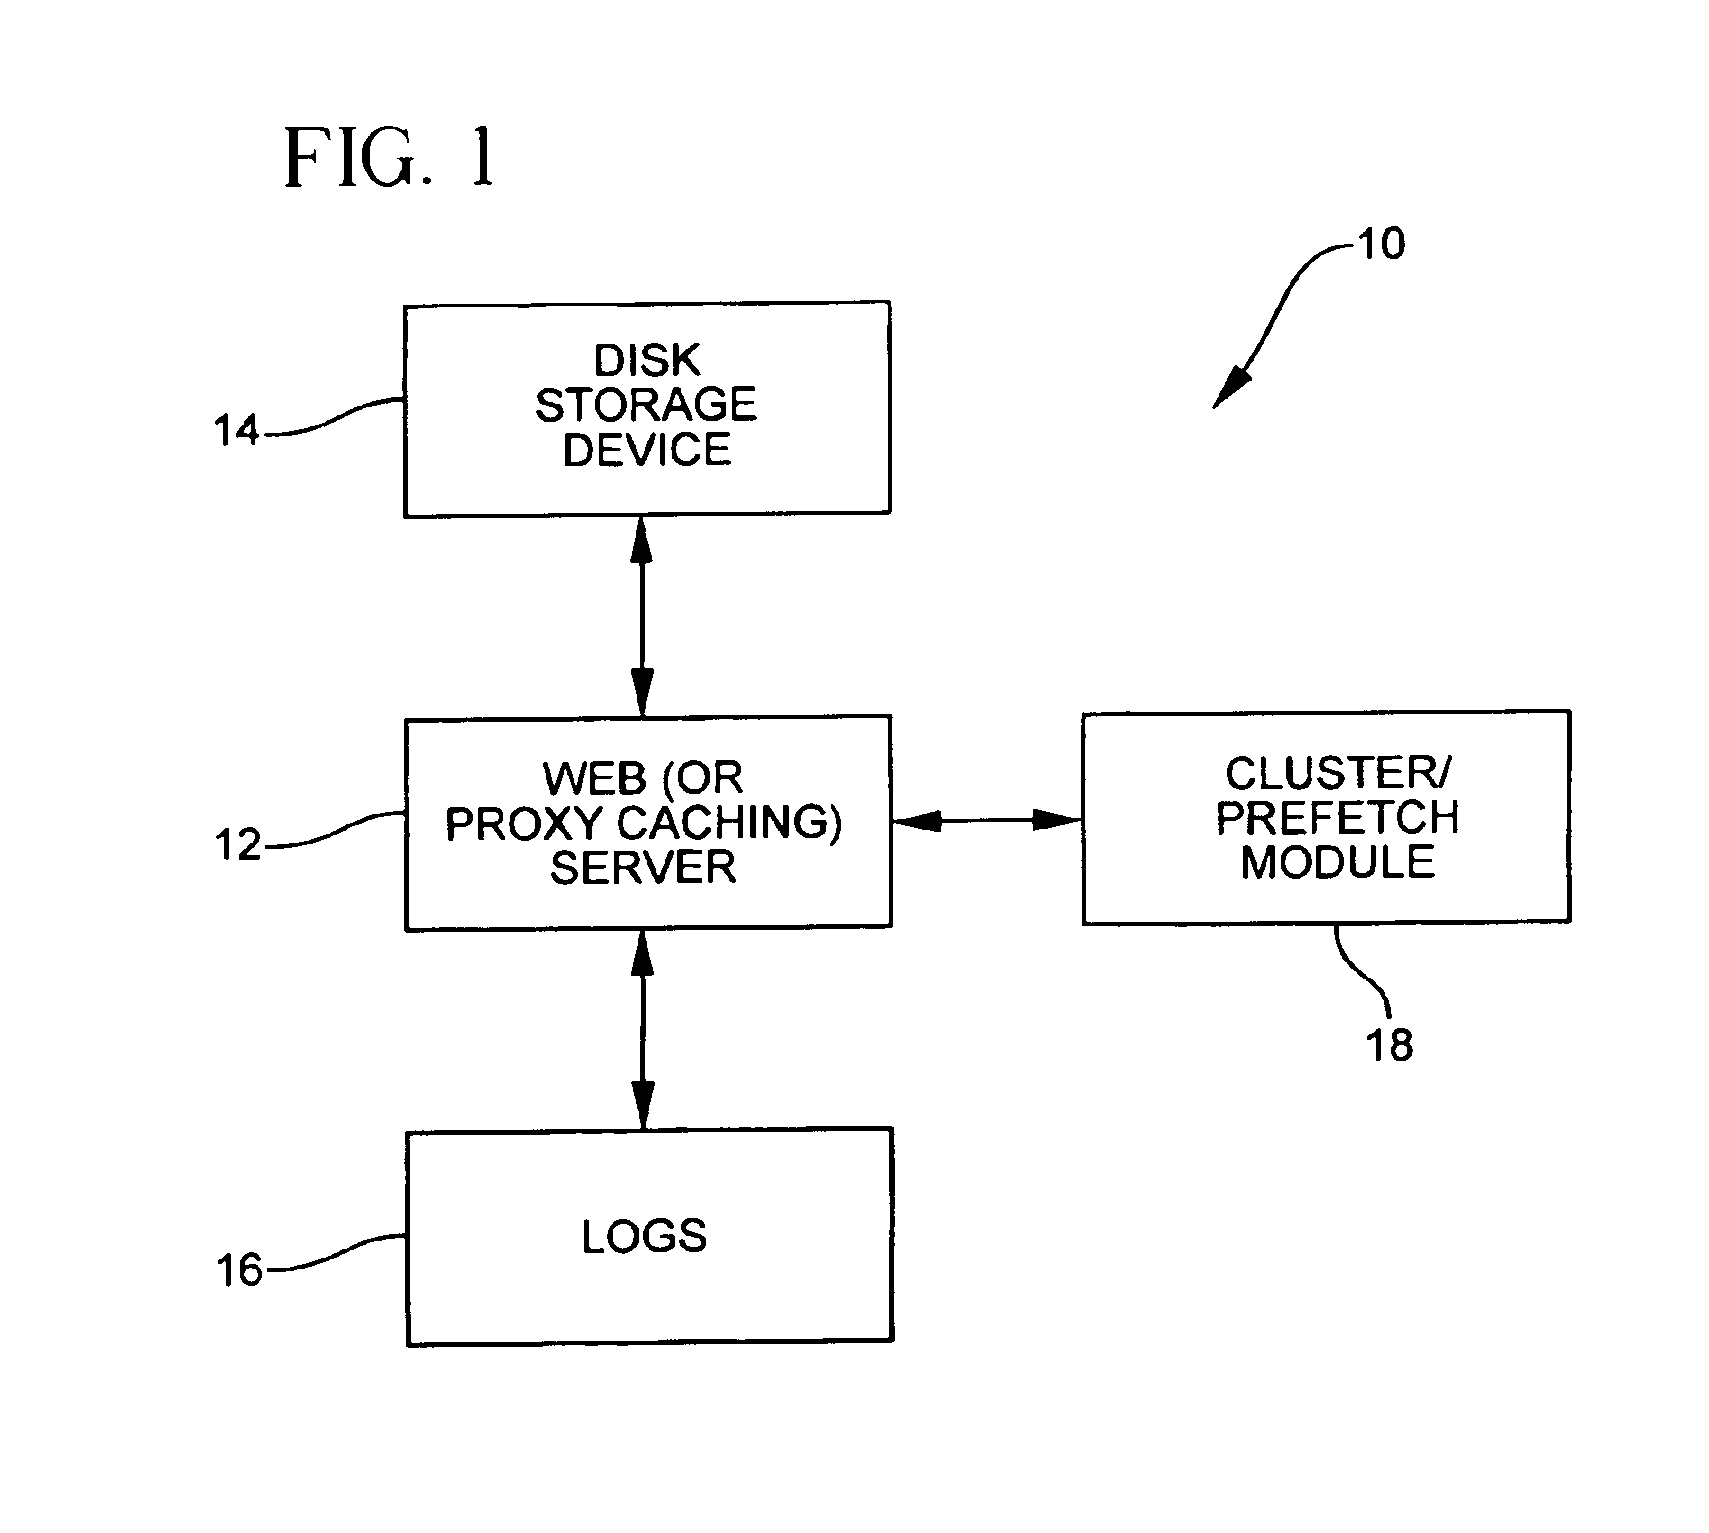 Methods and apparatus for clustering and prefetching data objects